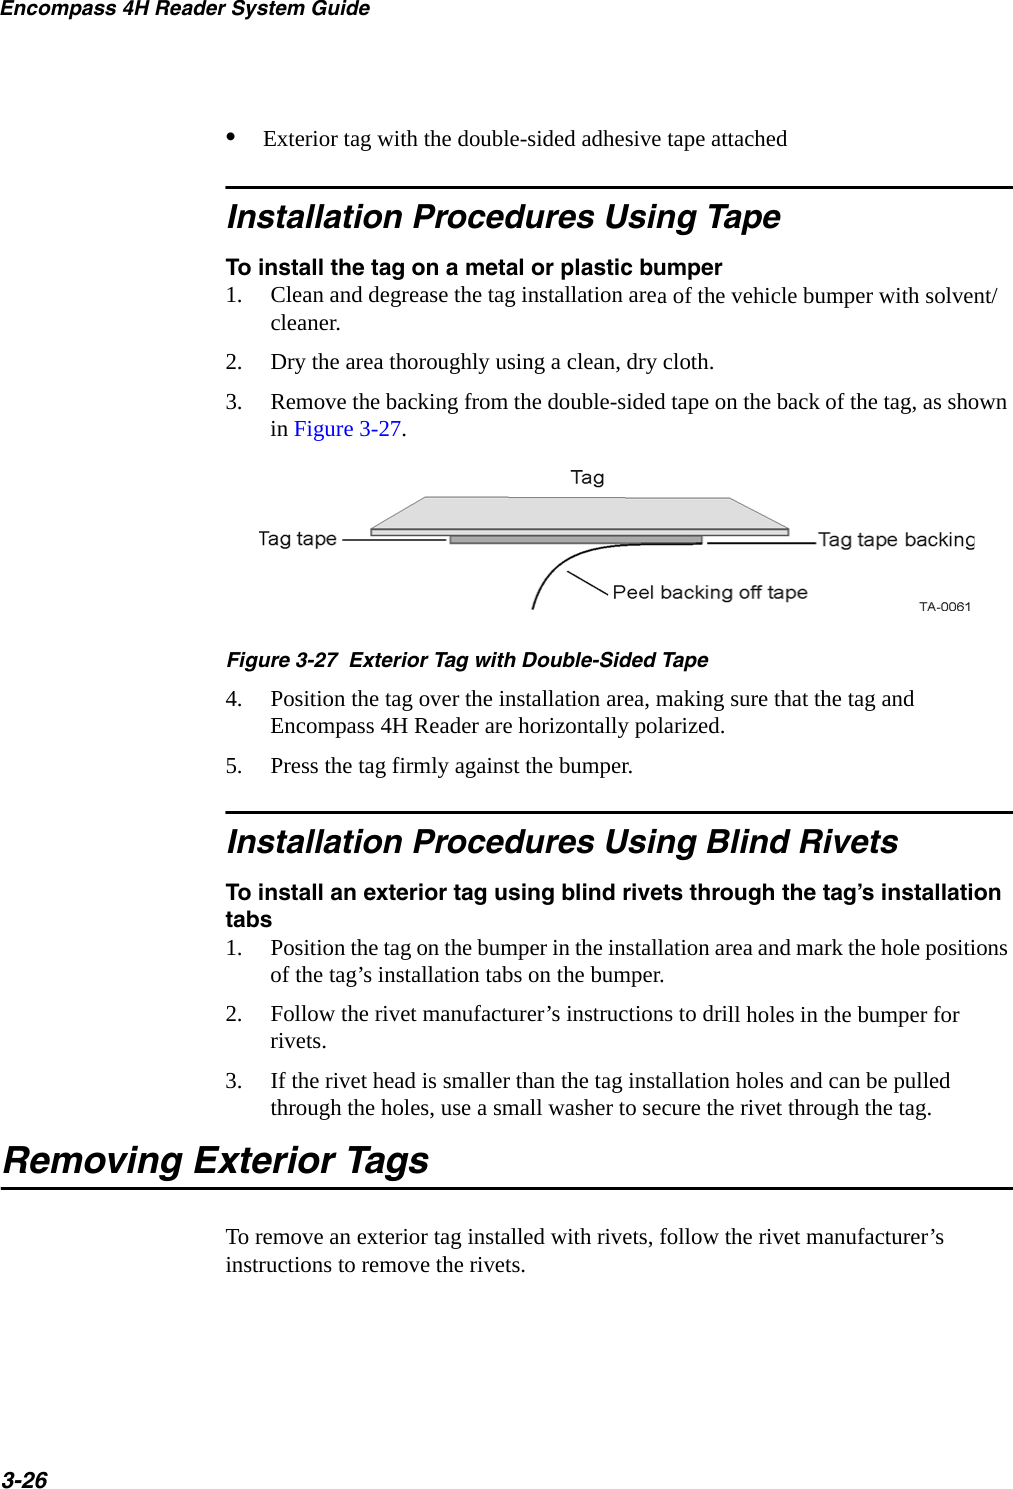 Encompass 4H Reader System Guide3-26•Exterior tag with the double-sided adhesive tape attached Installation Procedures Using TapeTo install the tag on a metal or plastic bumper1. Clean and degrease the tag installation area of the vehicle bumper with solvent/cleaner.2. Dry the area thoroughly using a clean, dry cloth.3. Remove the backing from the double-sided tape on the back of the tag, as shown in Figure 3-27. Figure 3-27  Exterior Tag with Double-Sided Tape4. Position the tag over the installation area, making sure that the tag and Encompass 4H Reader are horizontally polarized.5. Press the tag firmly against the bumper.Installation Procedures Using Blind RivetsTo install an exterior tag using blind rivets through the tag’s installation tabs1. Position the tag on the bumper in the installation area and mark the hole positions of the tag’s installation tabs on the bumper.2. Follow the rivet manufacturer’s instructions to drill holes in the bumper for rivets.3. If the rivet head is smaller than the tag installation holes and can be pulled through the holes, use a small washer to secure the rivet through the tag.Removing Exterior TagsTo remove an exterior tag installed with rivets, follow the rivet manufacturer’s instructions to remove the rivets.